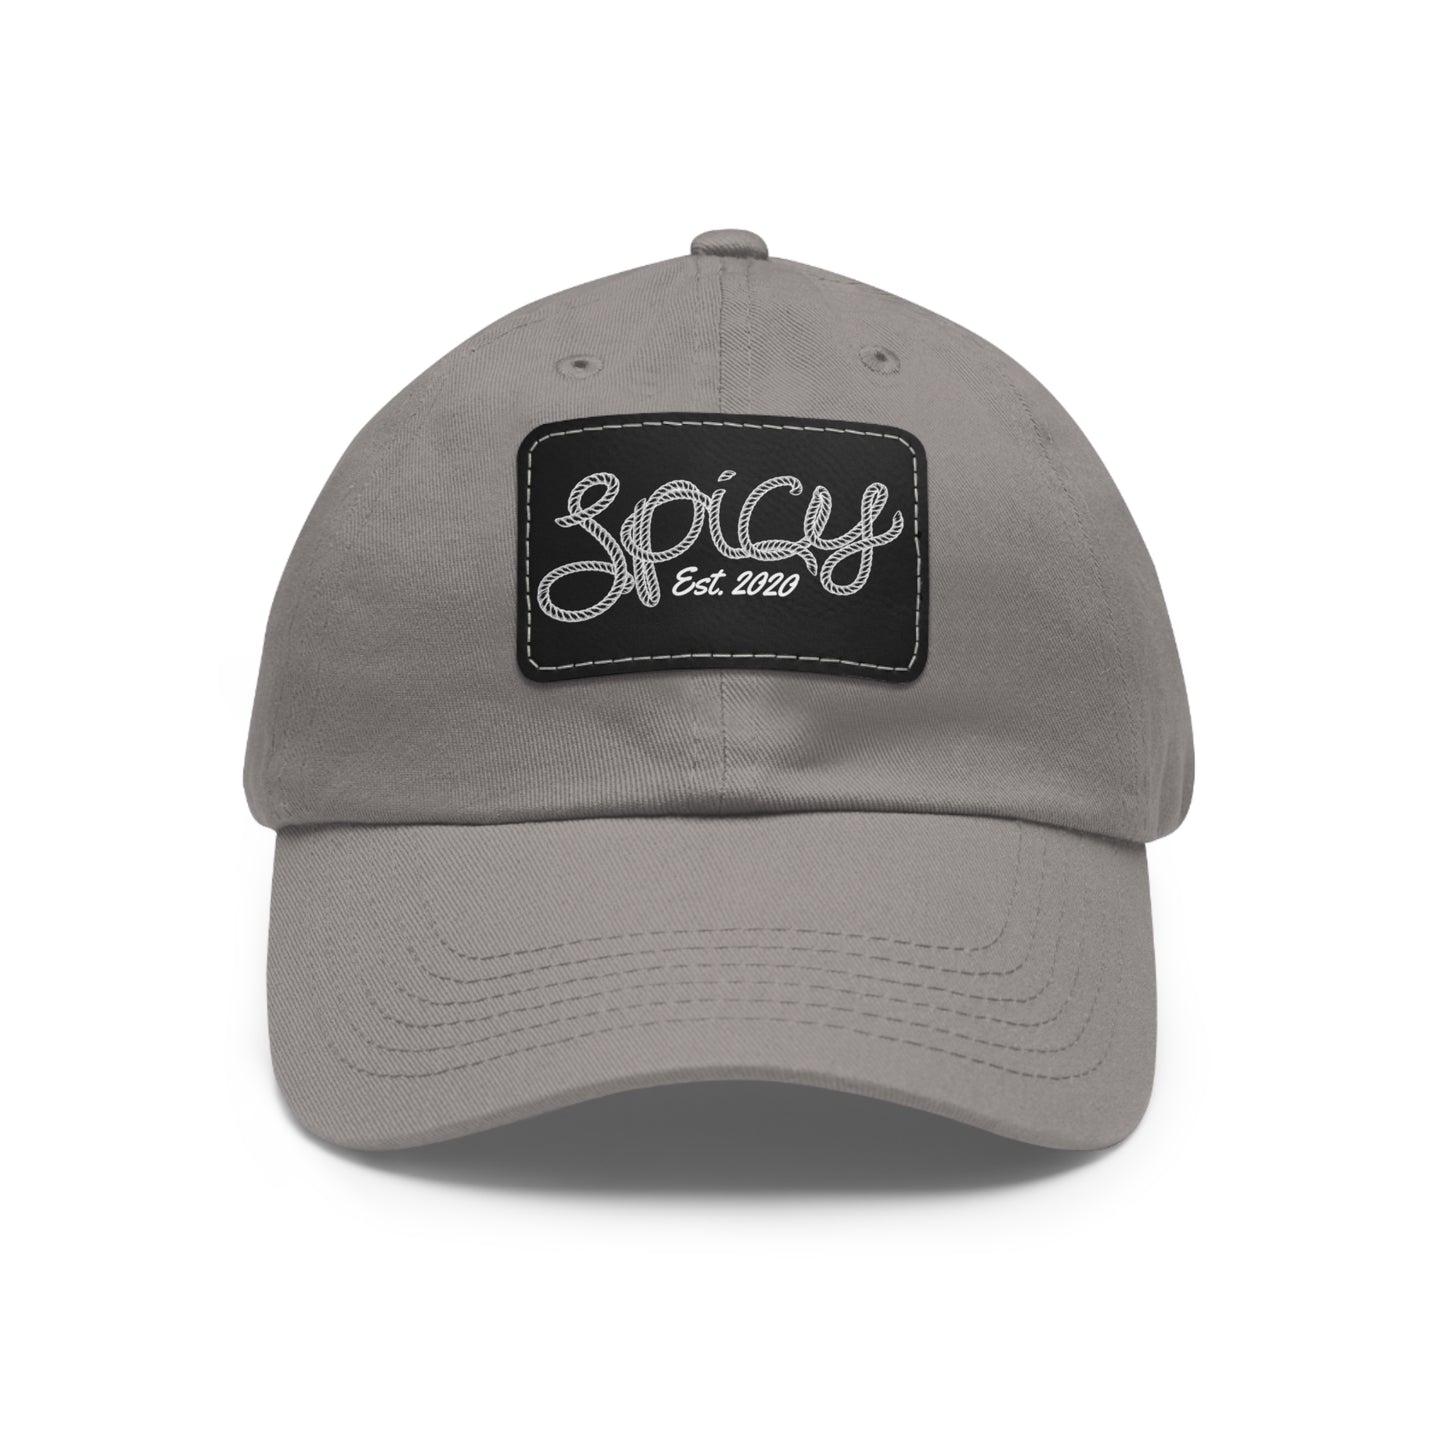 Spicy Western Rope | Dad Hat with Faux Leather Patch